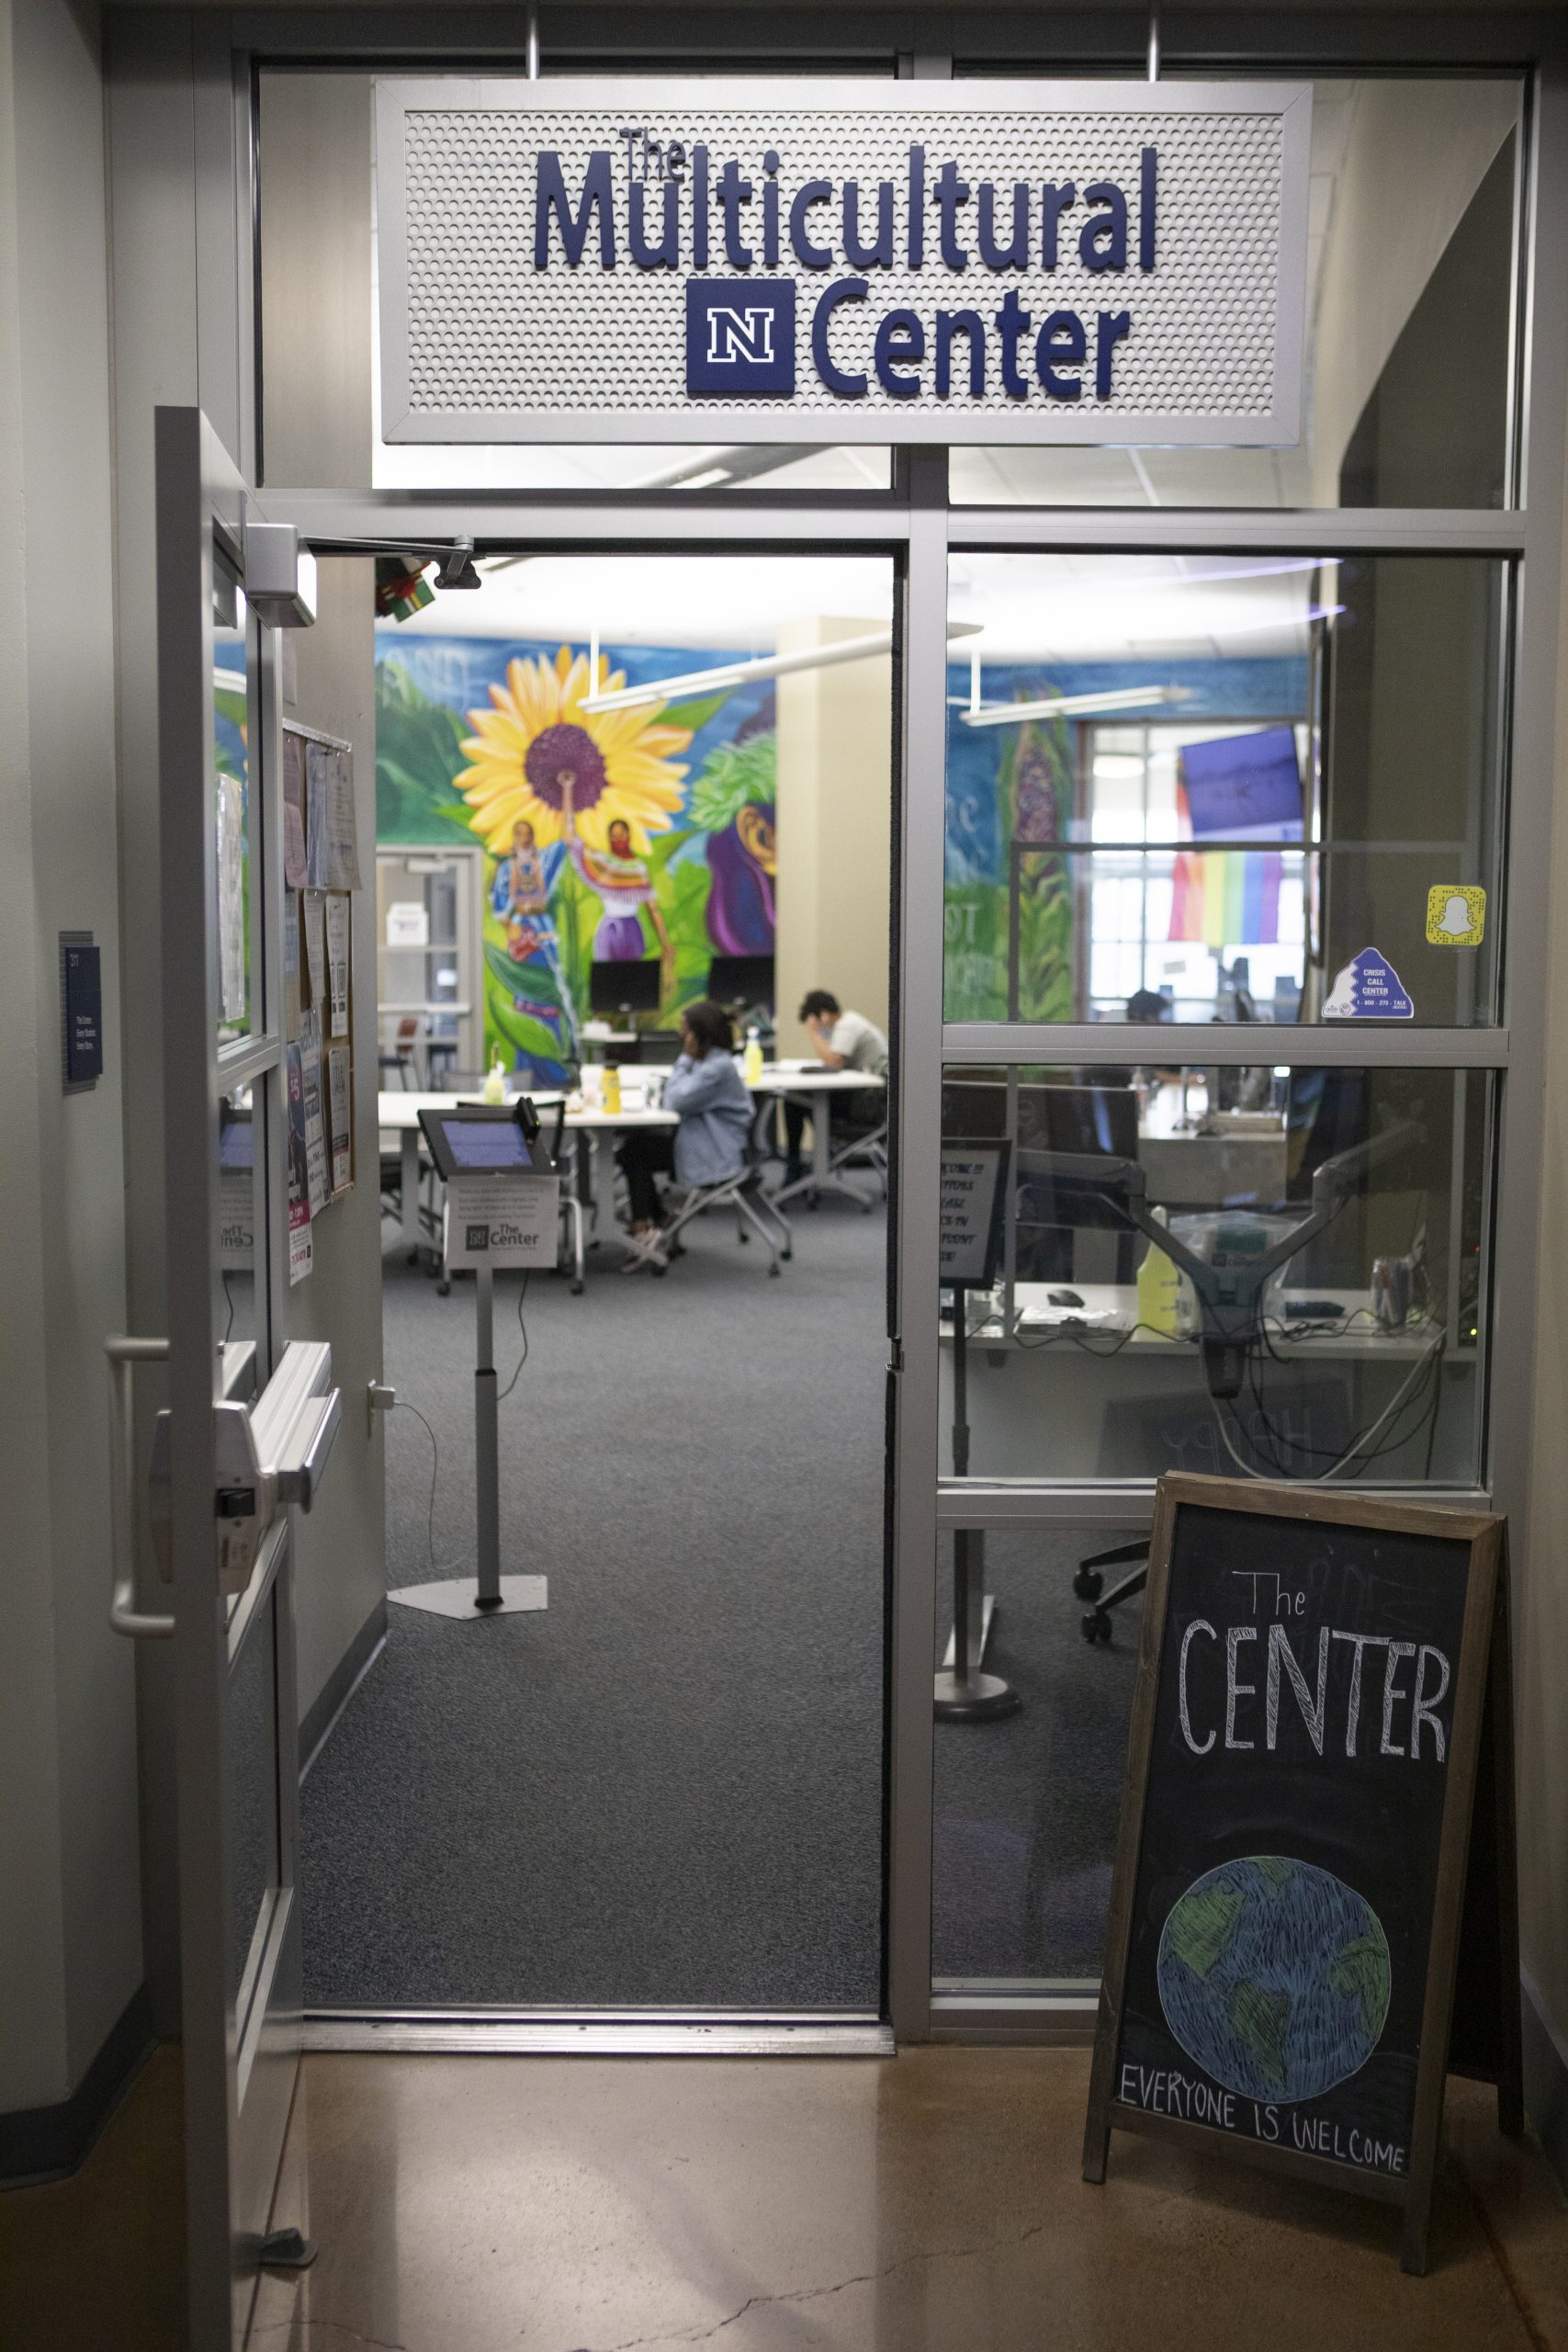 Open glass door with a silver sign above that read "The Multicultural Center" in blue letters with a UNR logo beneath it. Blurred sunflower mural in background of the image through the open door.